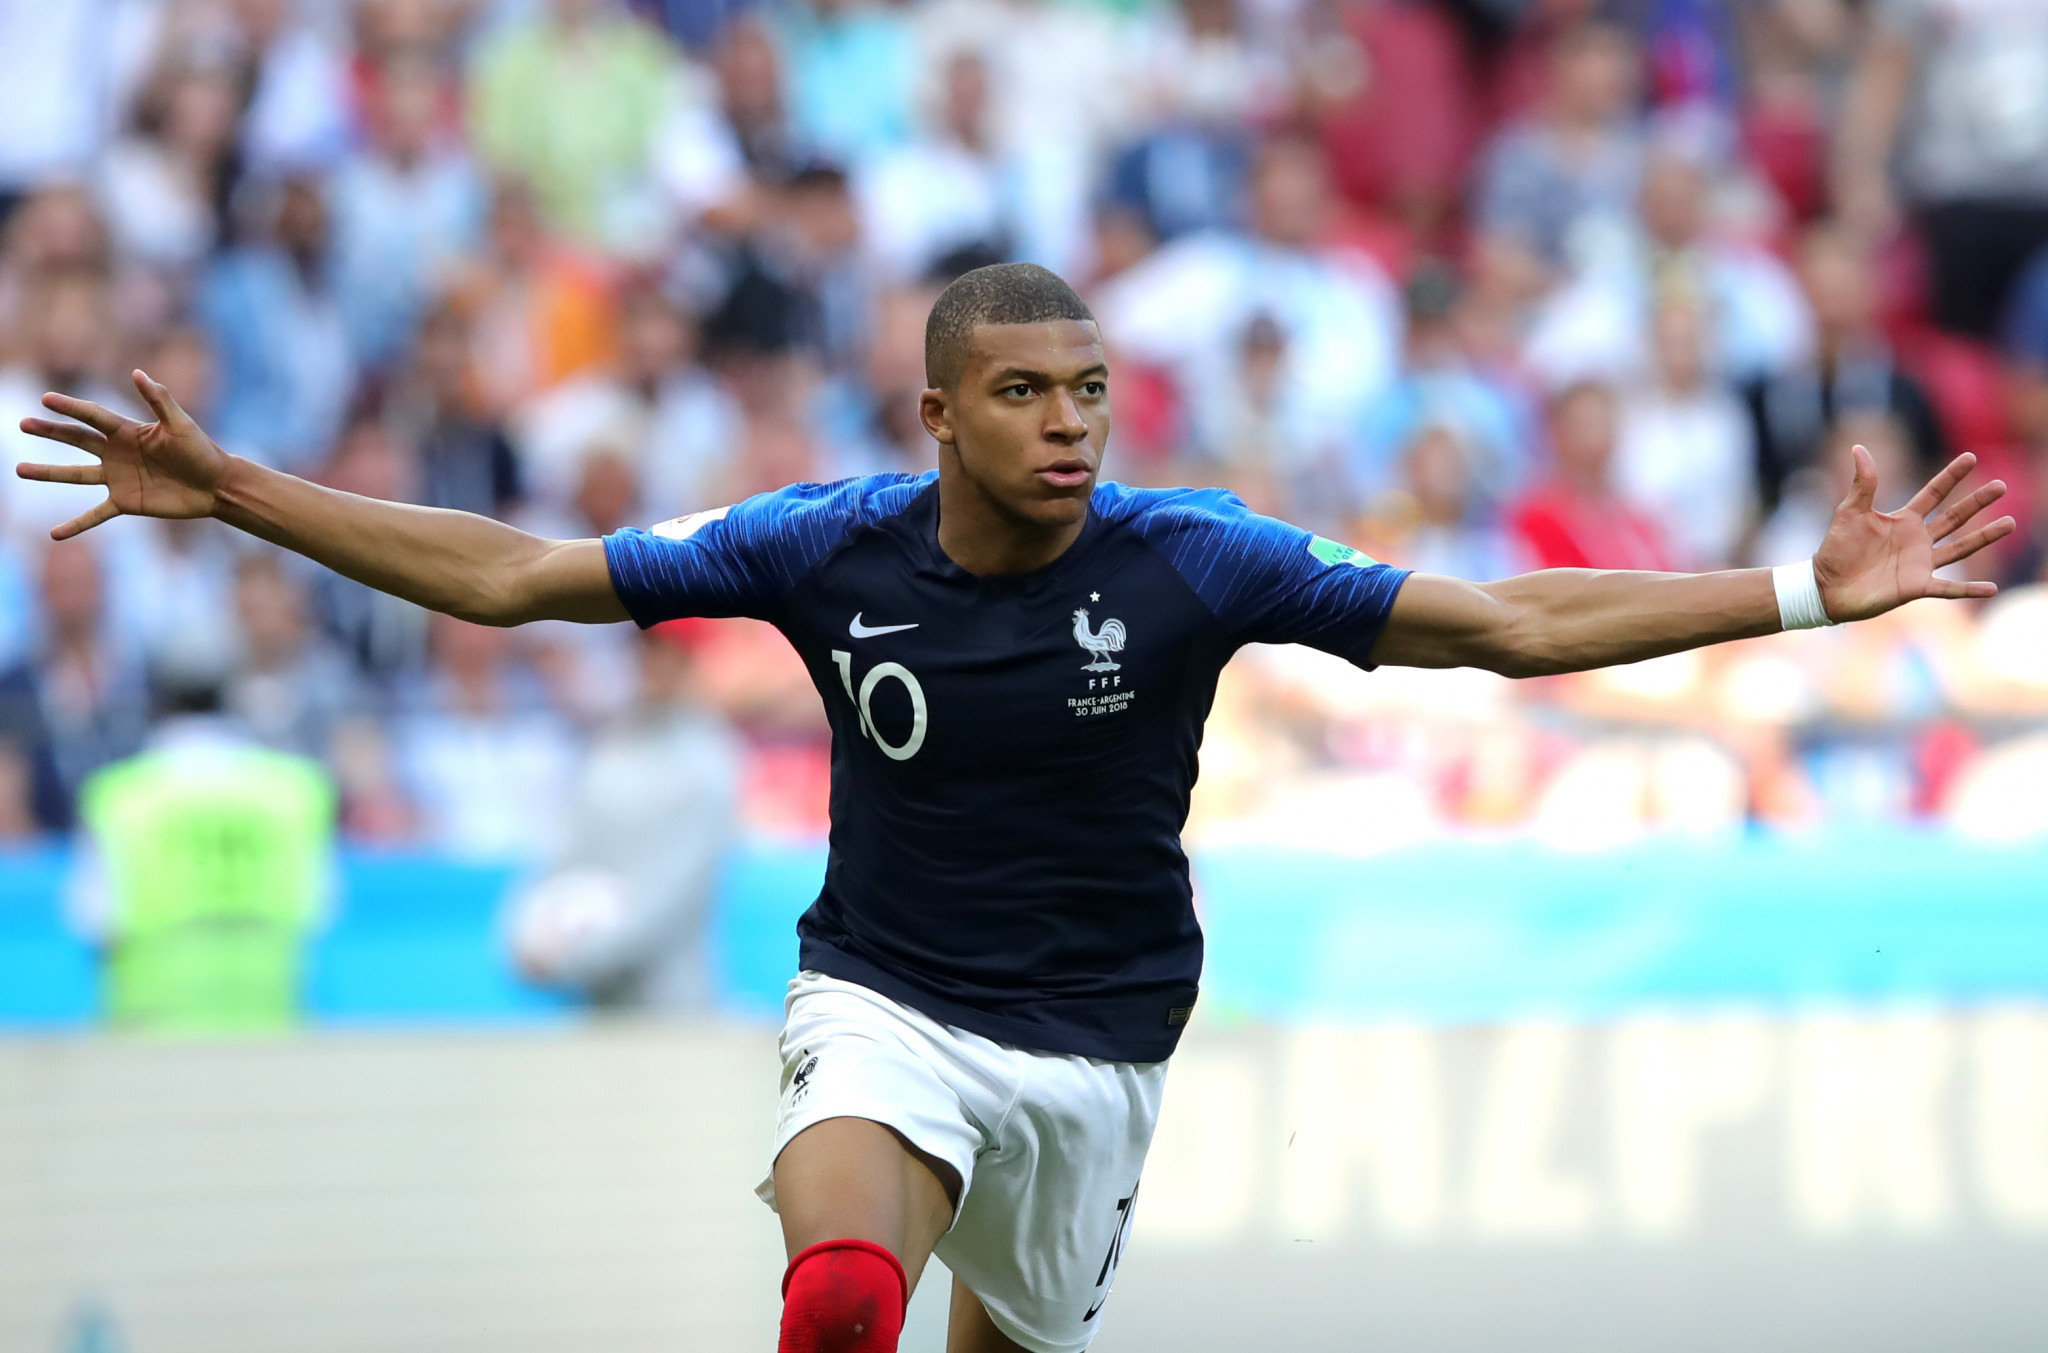 Mbappé claims to feel "destined" to play at Paris 2024